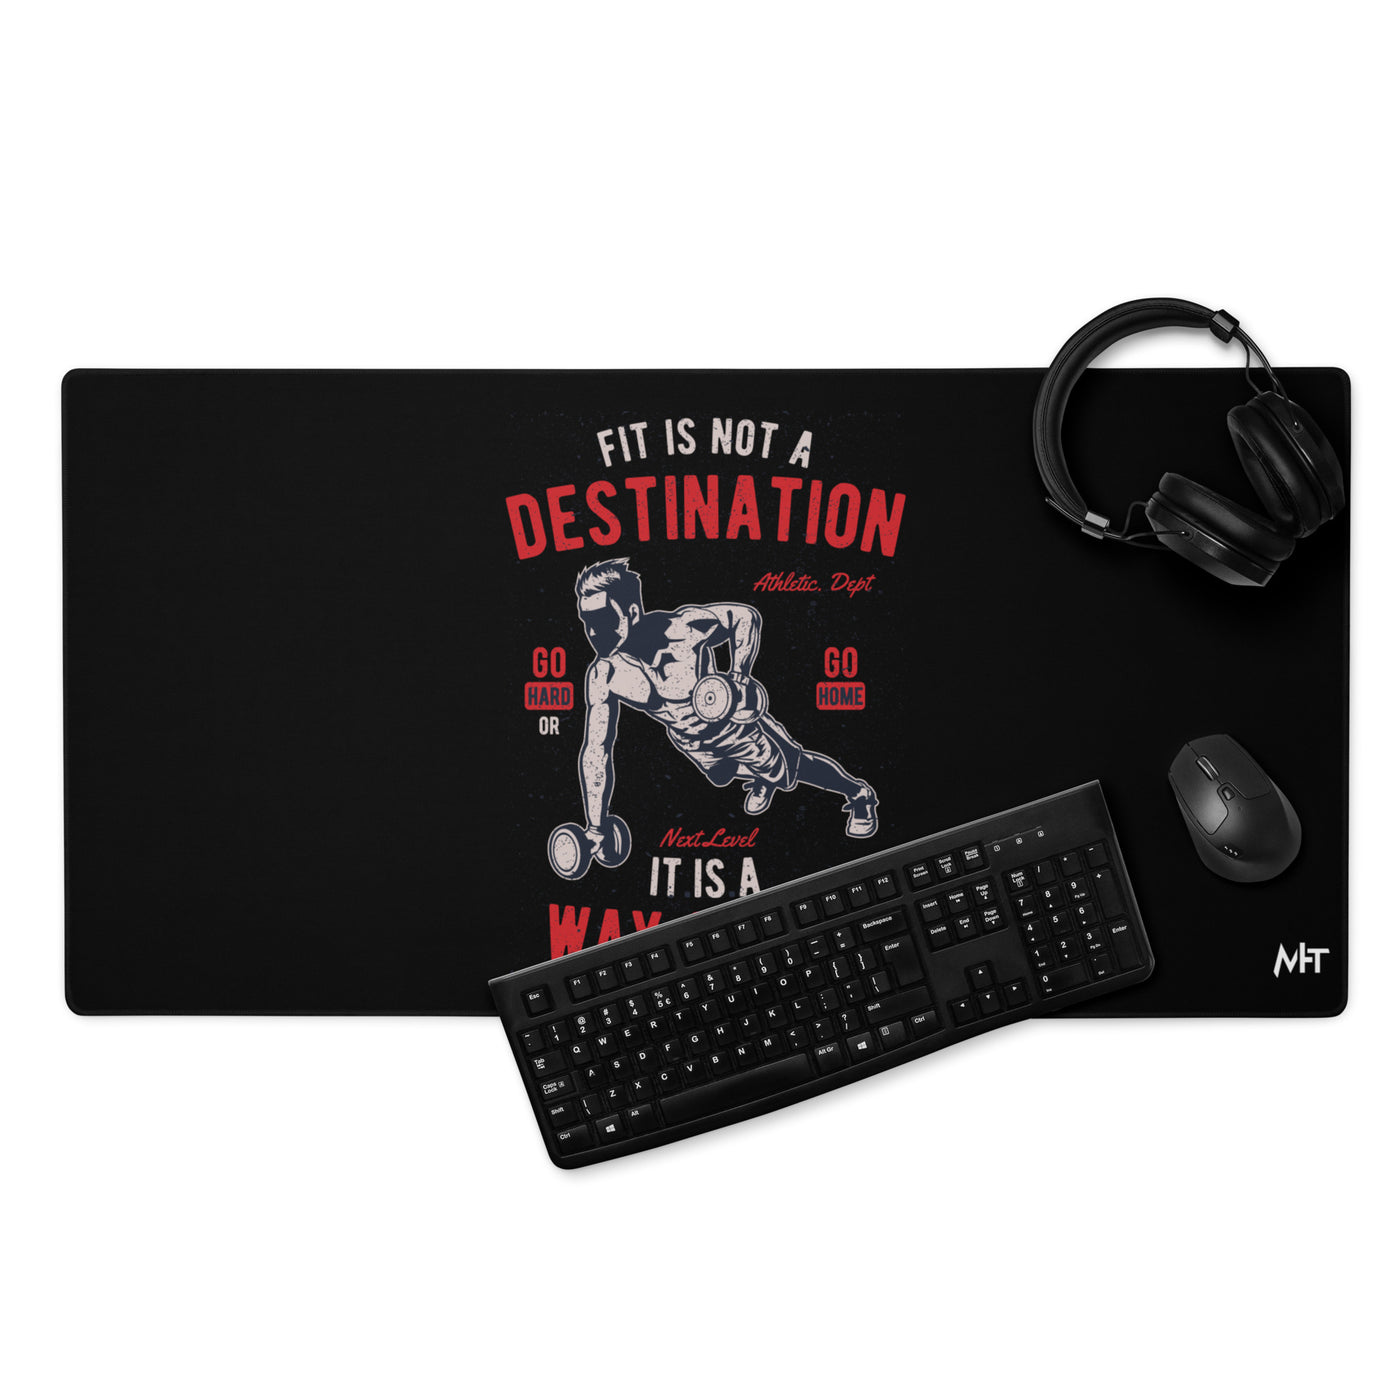 Fit is not a destination: it is a way of life - Desk Mat